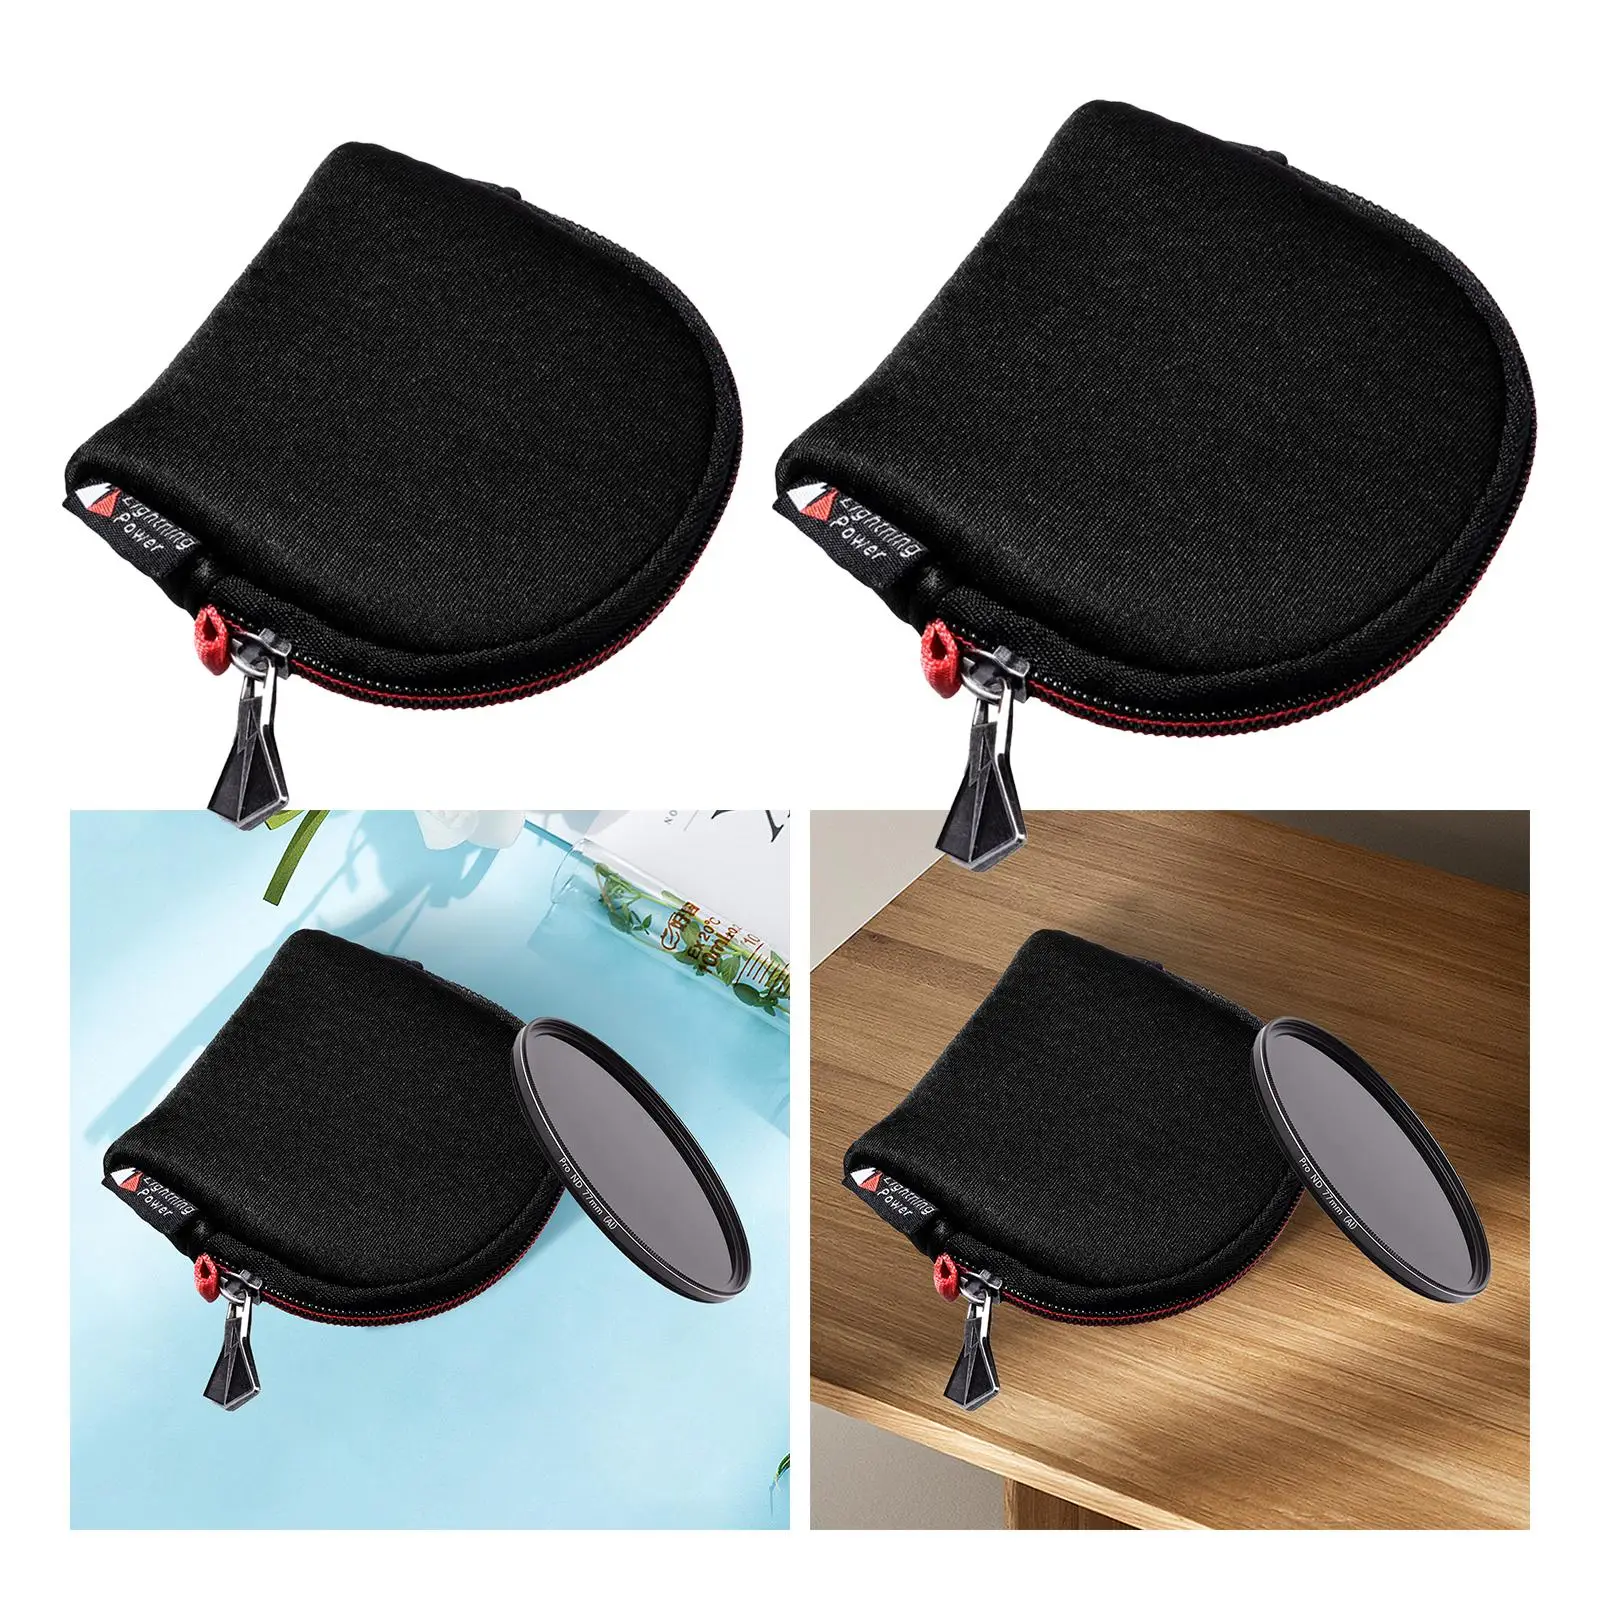 Filter Holder Photography Accessories Professional Waterproof Outside Filter Carrying Case Camera Filter Pouch Lens Filter Bag